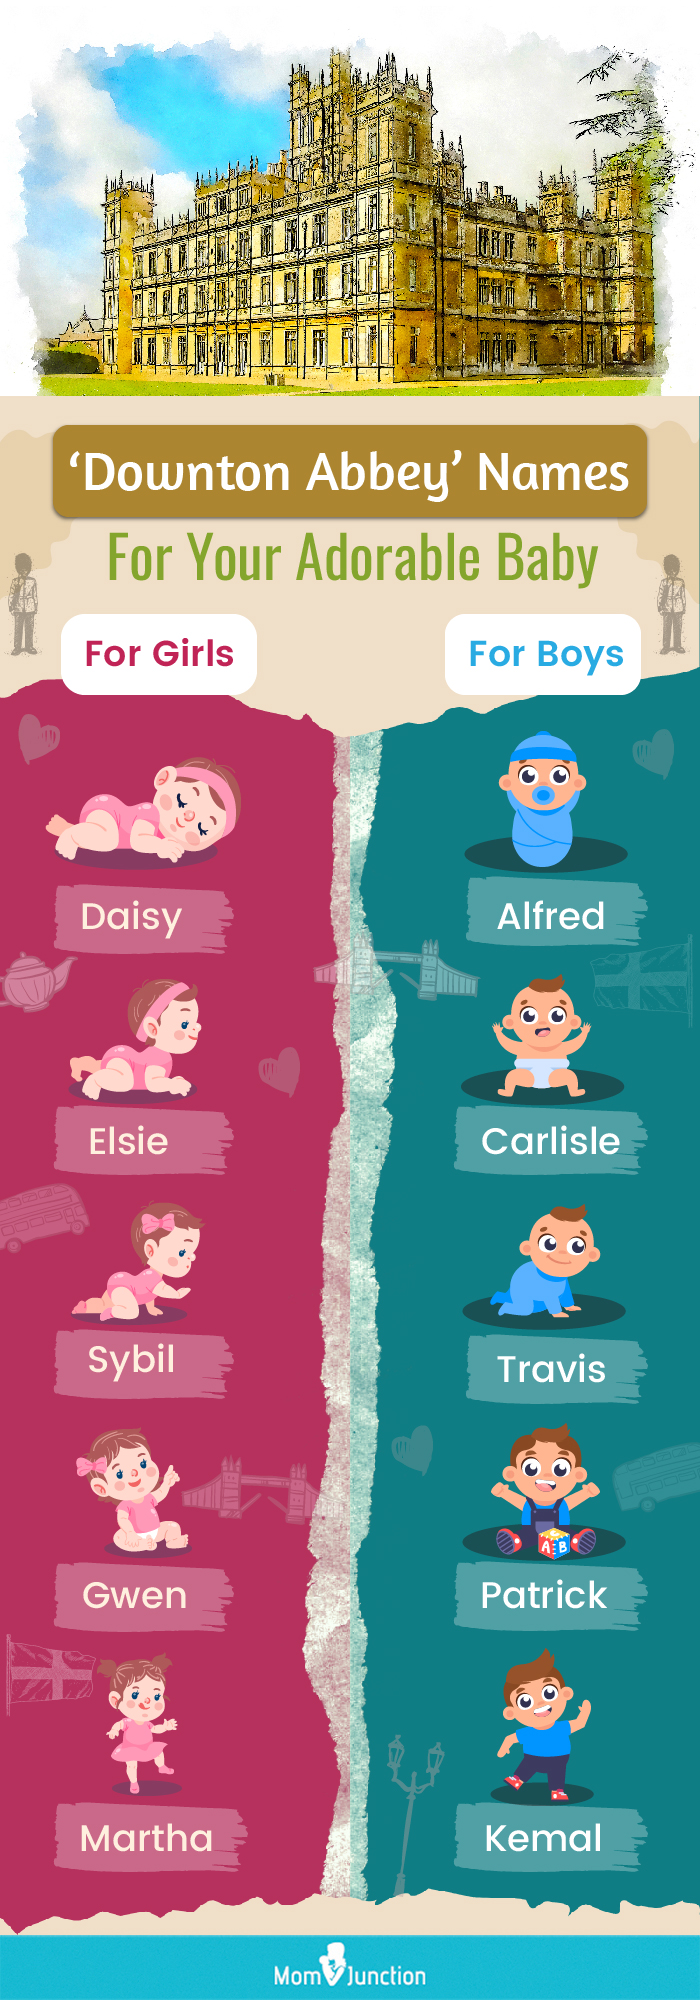 downton abbey names for your adorable baby (infographic)